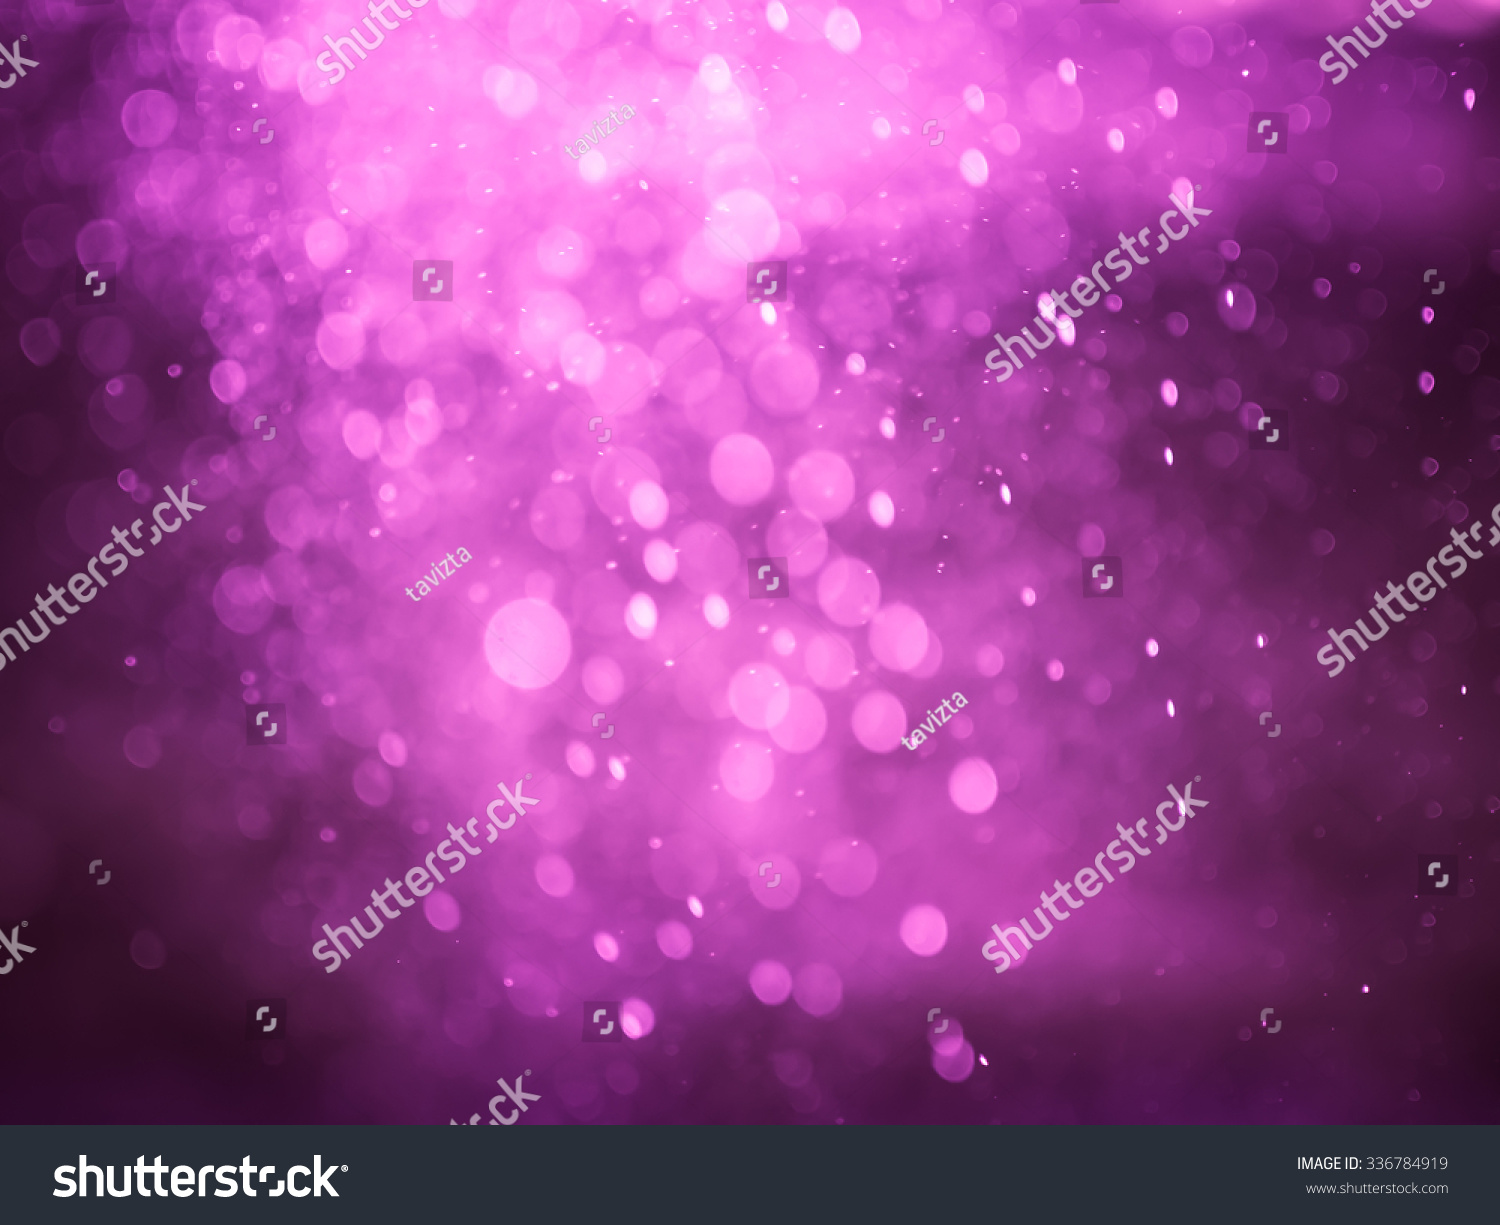 Abstract bokeh background #336784919